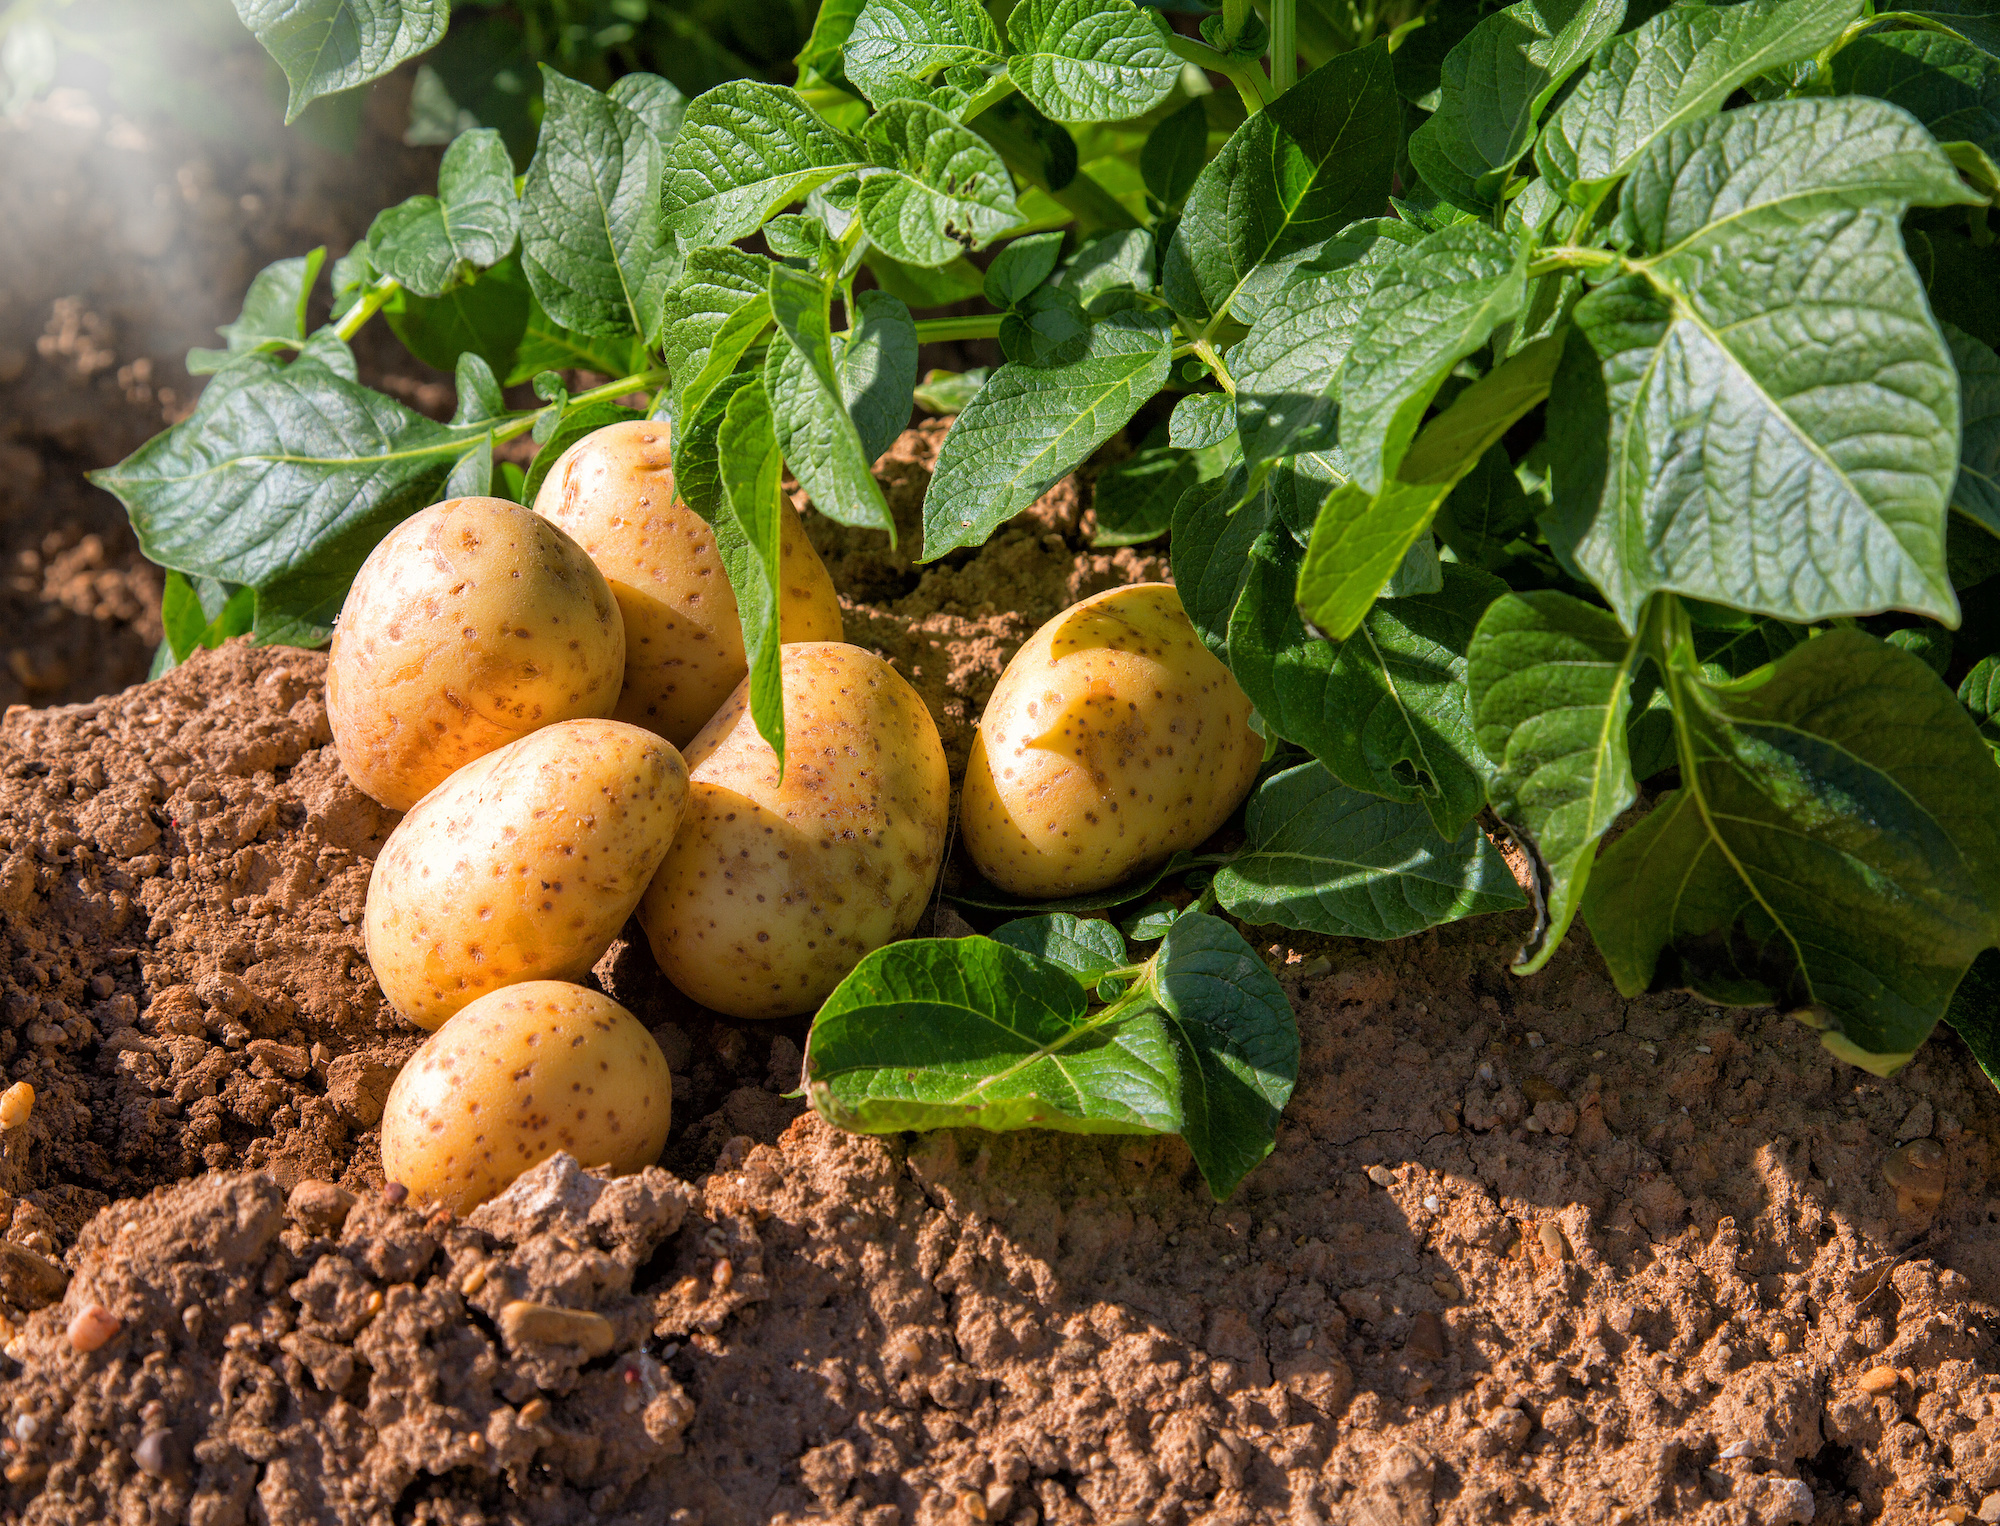 Beautiful potatoes with less pesticide thanks to CRISPR/Cas9. (Image: Adobe Stock)